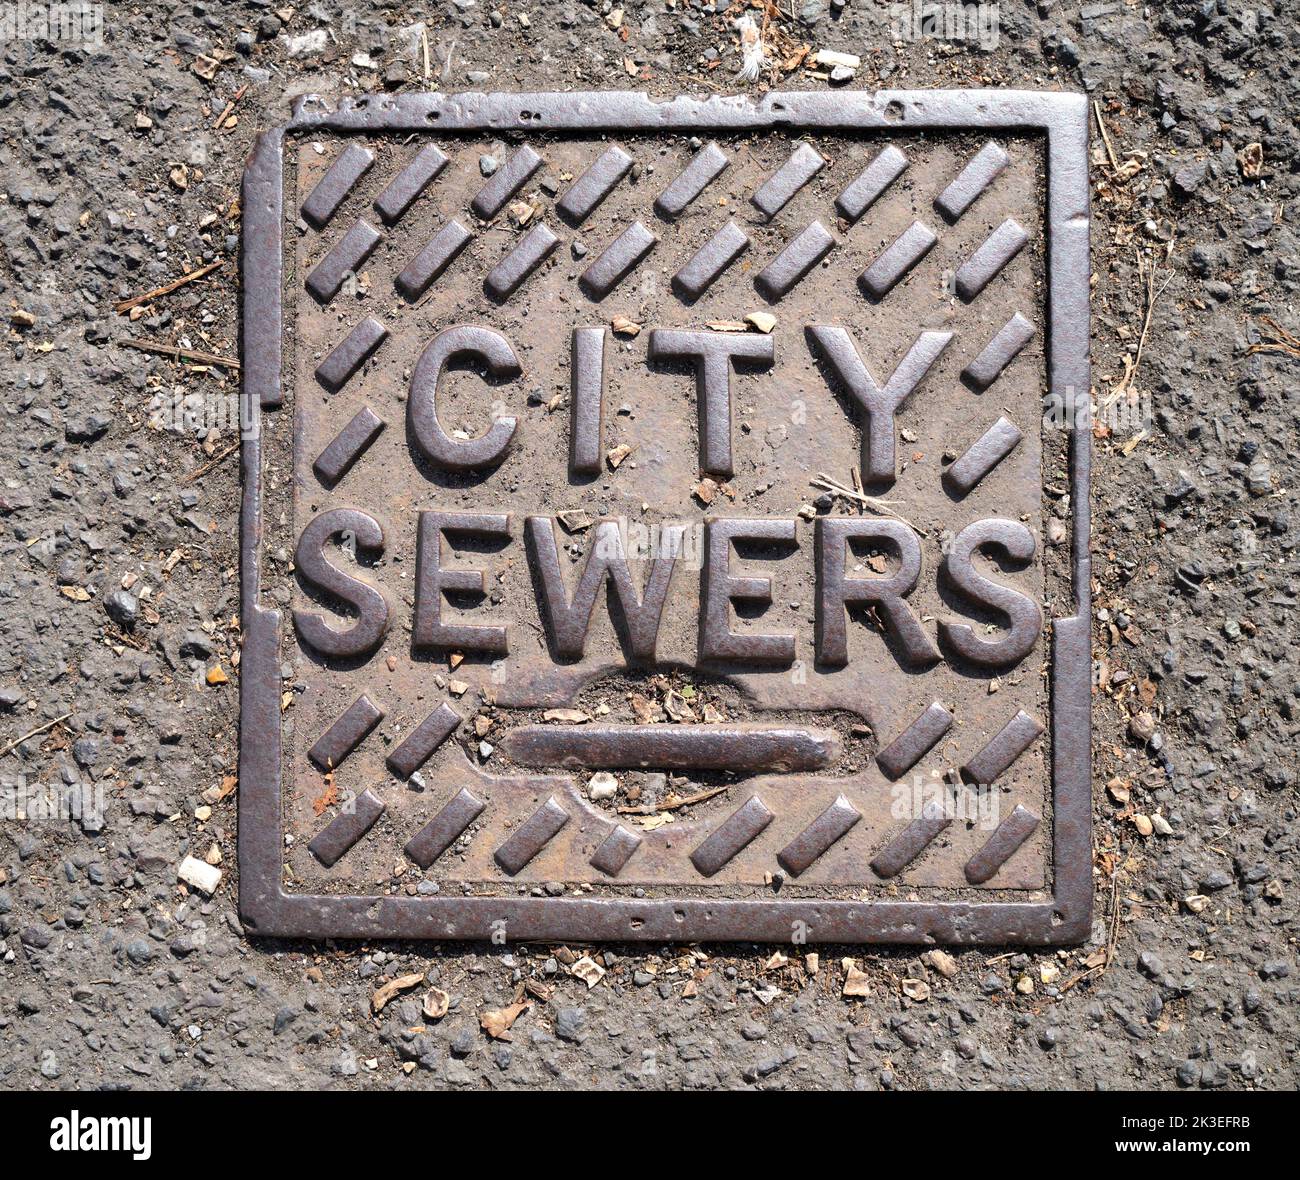 City Sewers Manhole Cover in Bath England Stock Photo